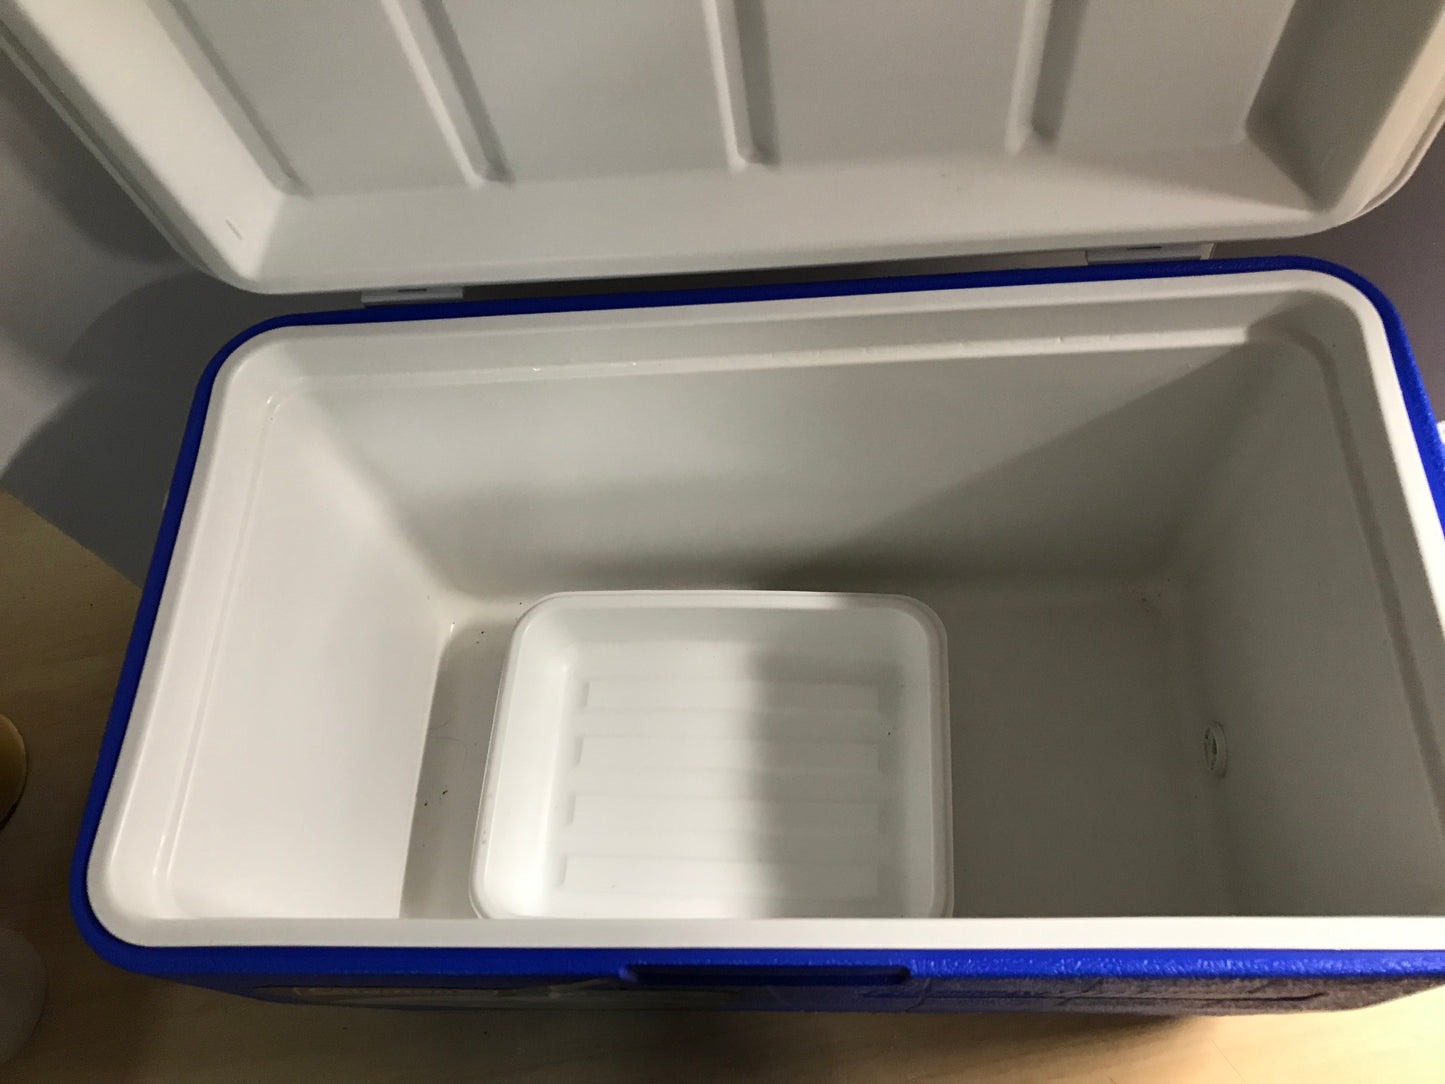 Camping Adventures Cooler Coleman Chest 48 Quart With Plug Keeps Ice 3 Days As New Blue White